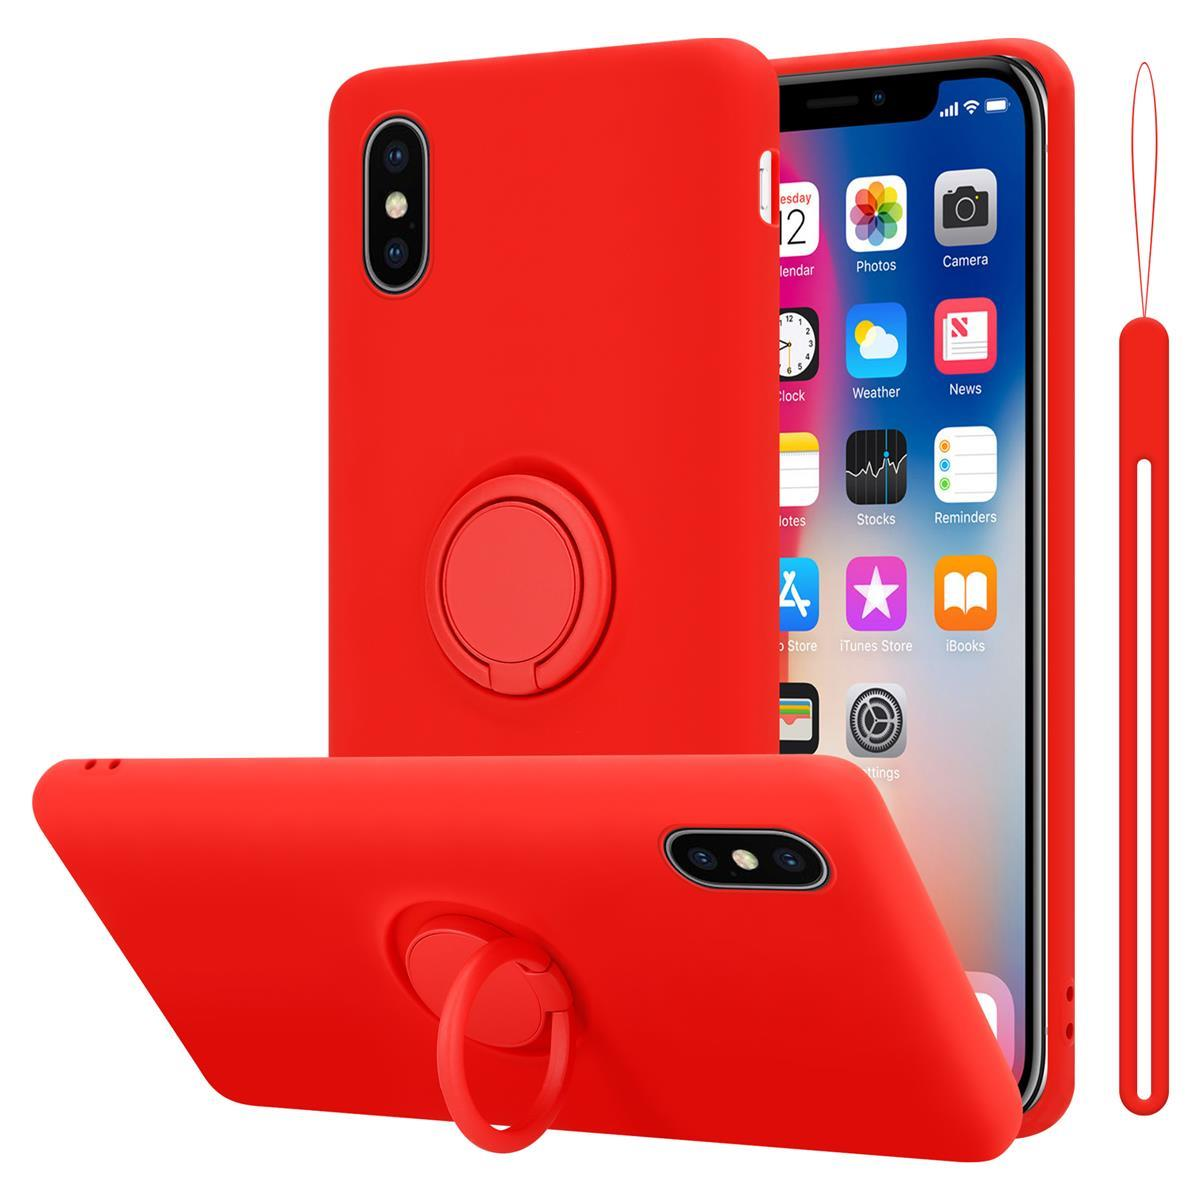 CADORABO ROT im Liquid Case Ring LIQUID iPhone Apple, Style, XS, X Silicone Backcover, Hülle /